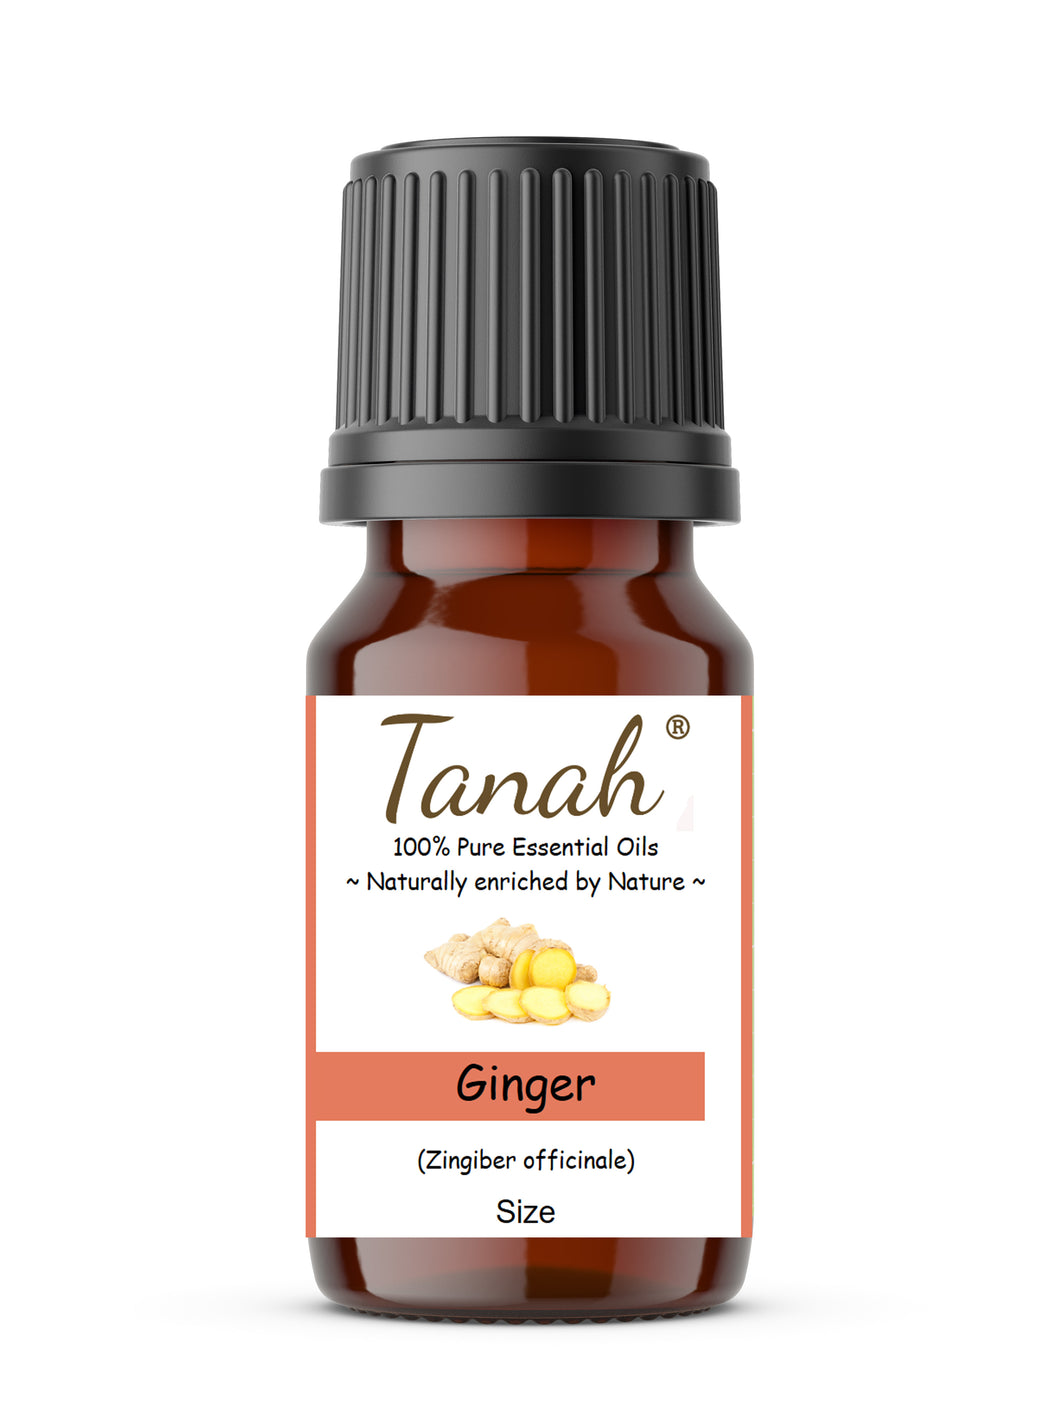 Ginger (China) essential oil (Zingiber Officinale) | Where to buy? Tanah Essential Oil Company | Retail |  Wholesale | Australia